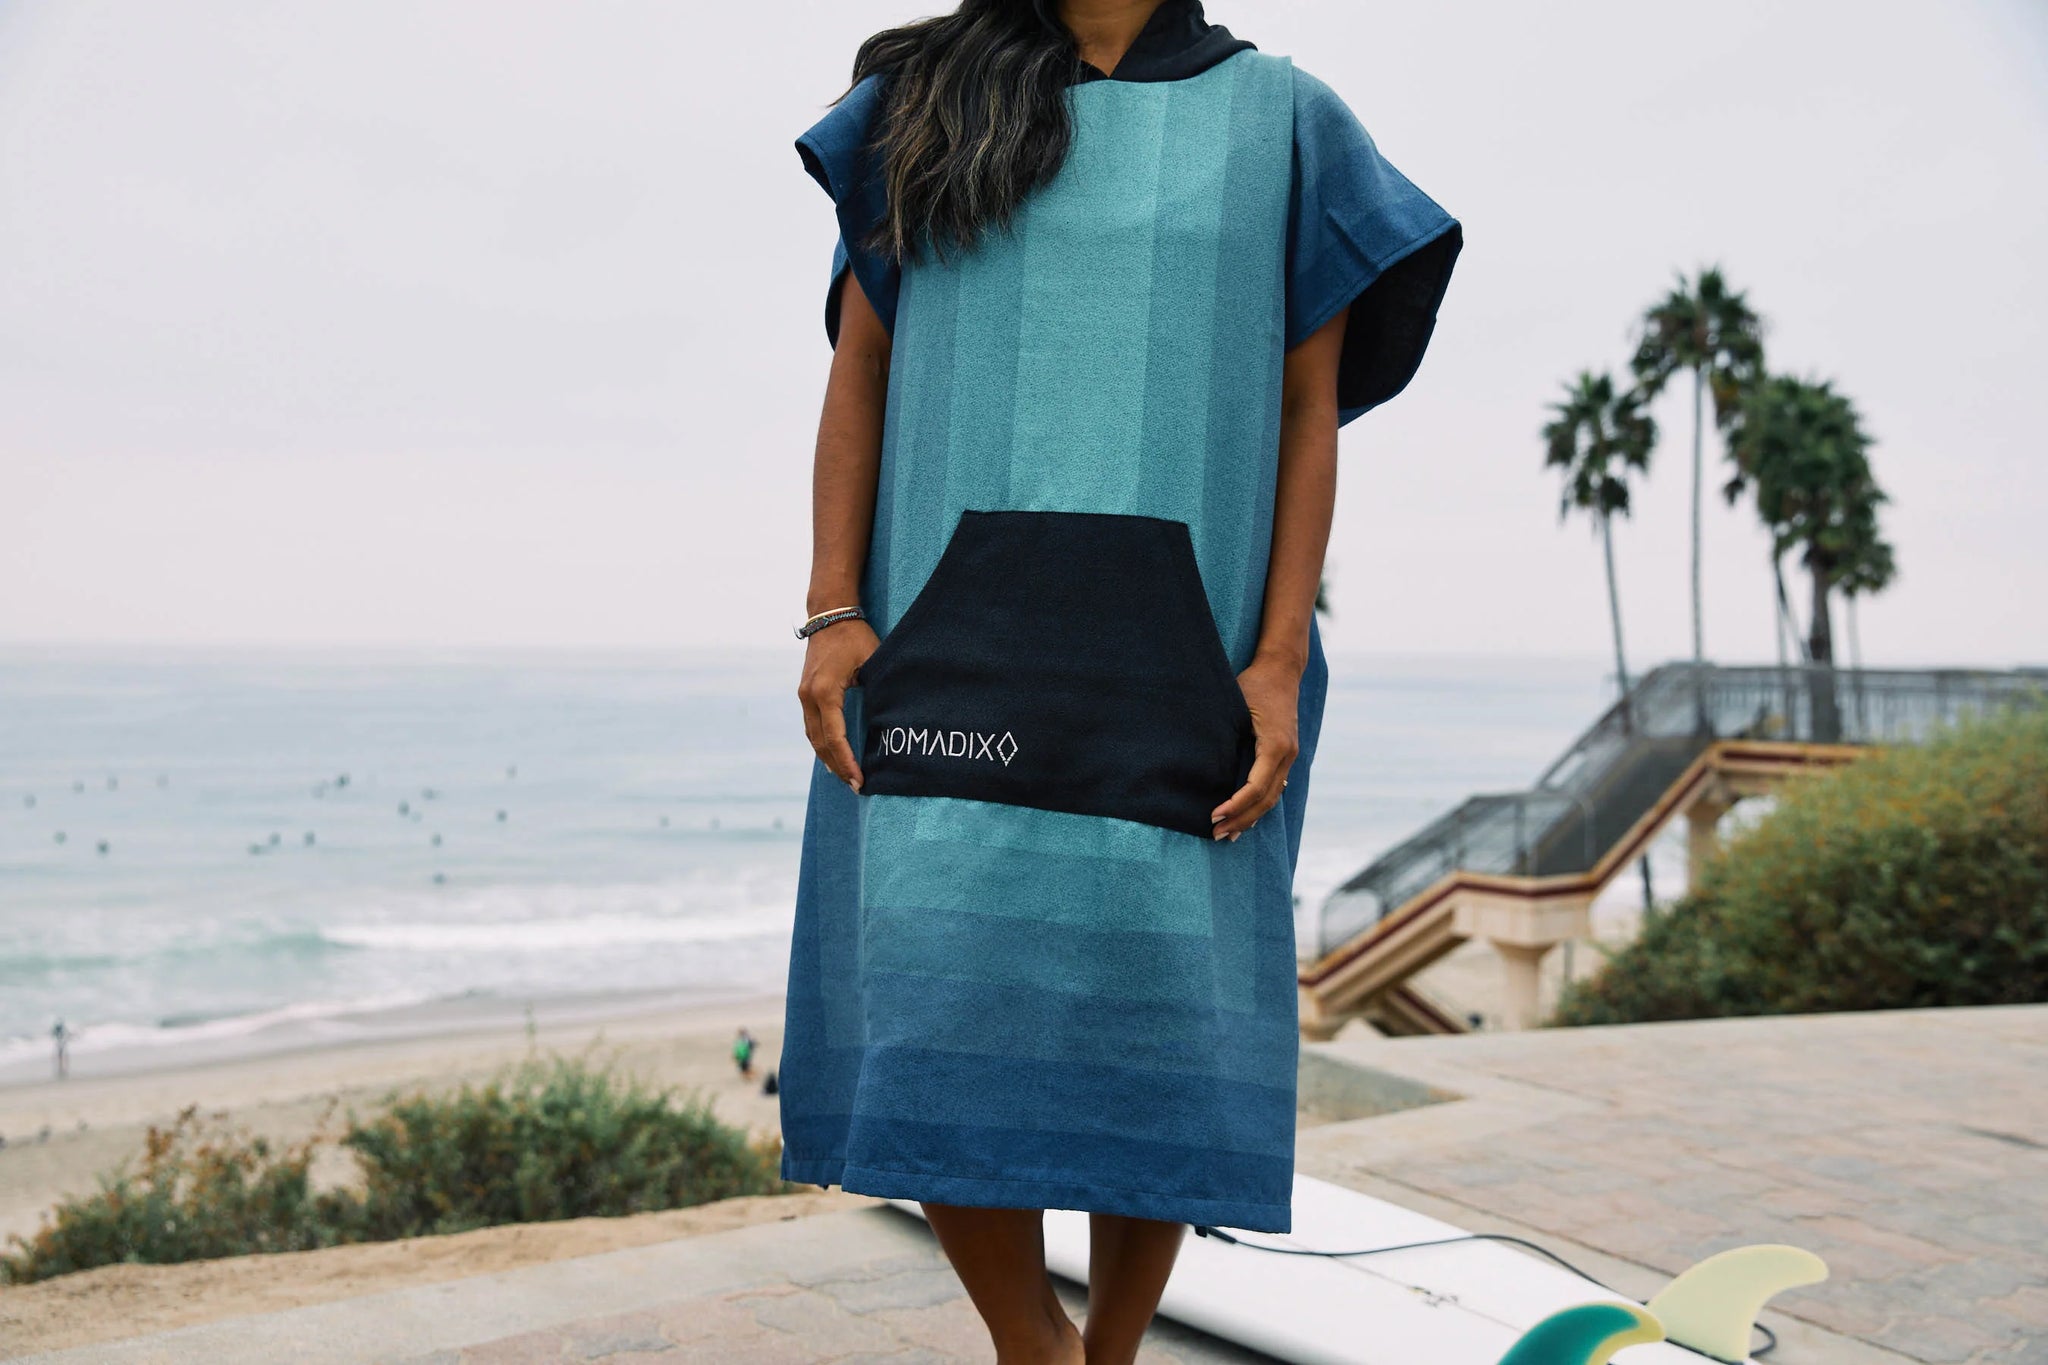 Changing Poncho: Zone Teal M/L